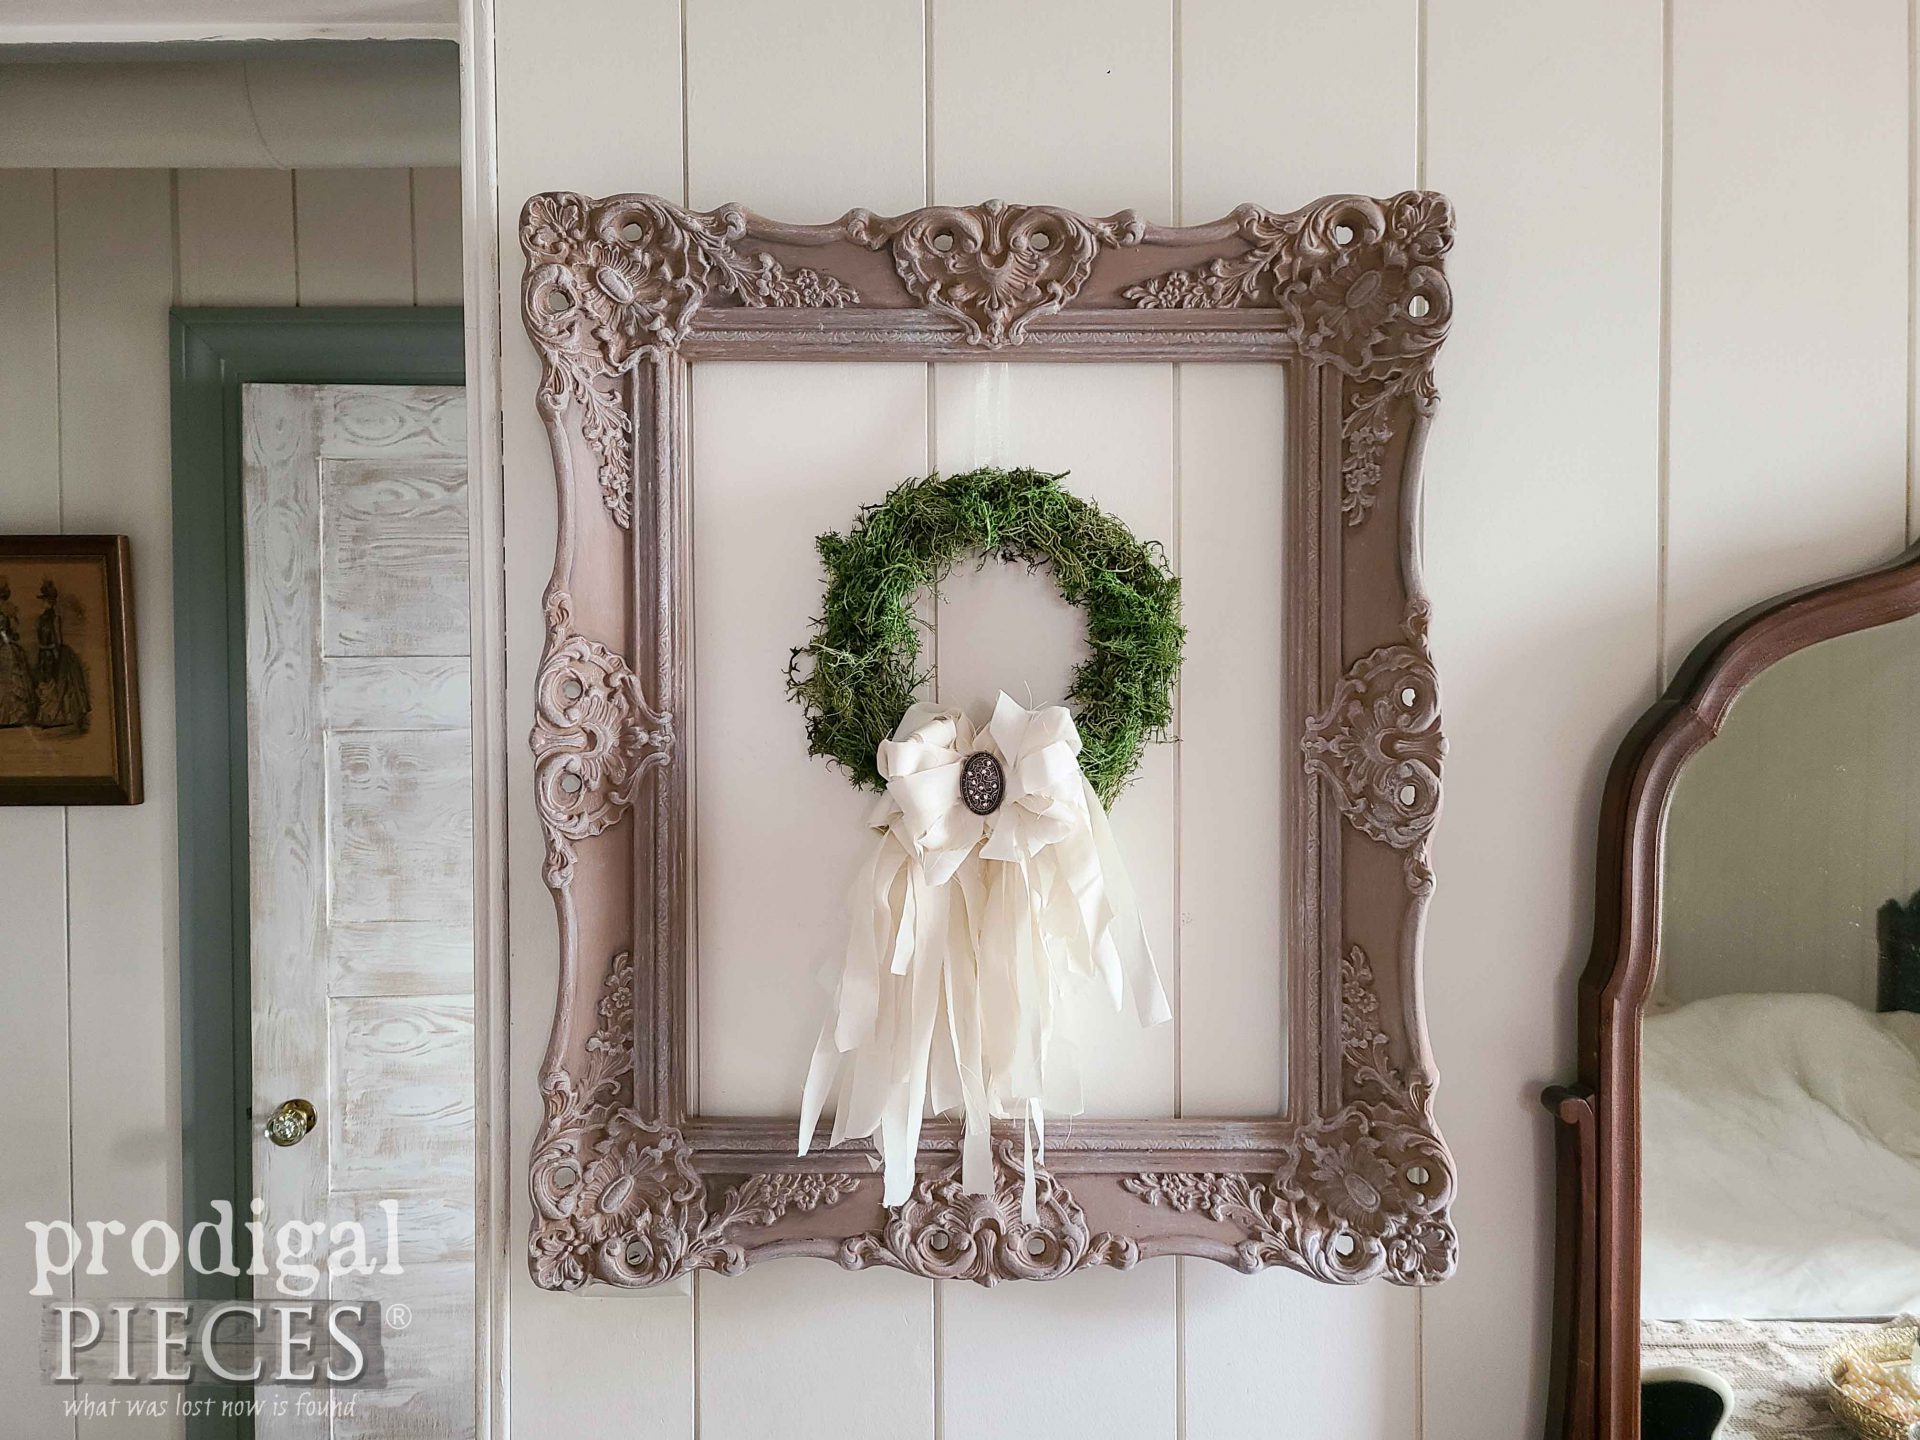 DIY Farmhouse Wall Art Created from an Upcycled Ornate Frame by Larissa of Prodigal Pieces | prodigalpieces.com #prodigalpieces #farmhouse #upcycled #diy